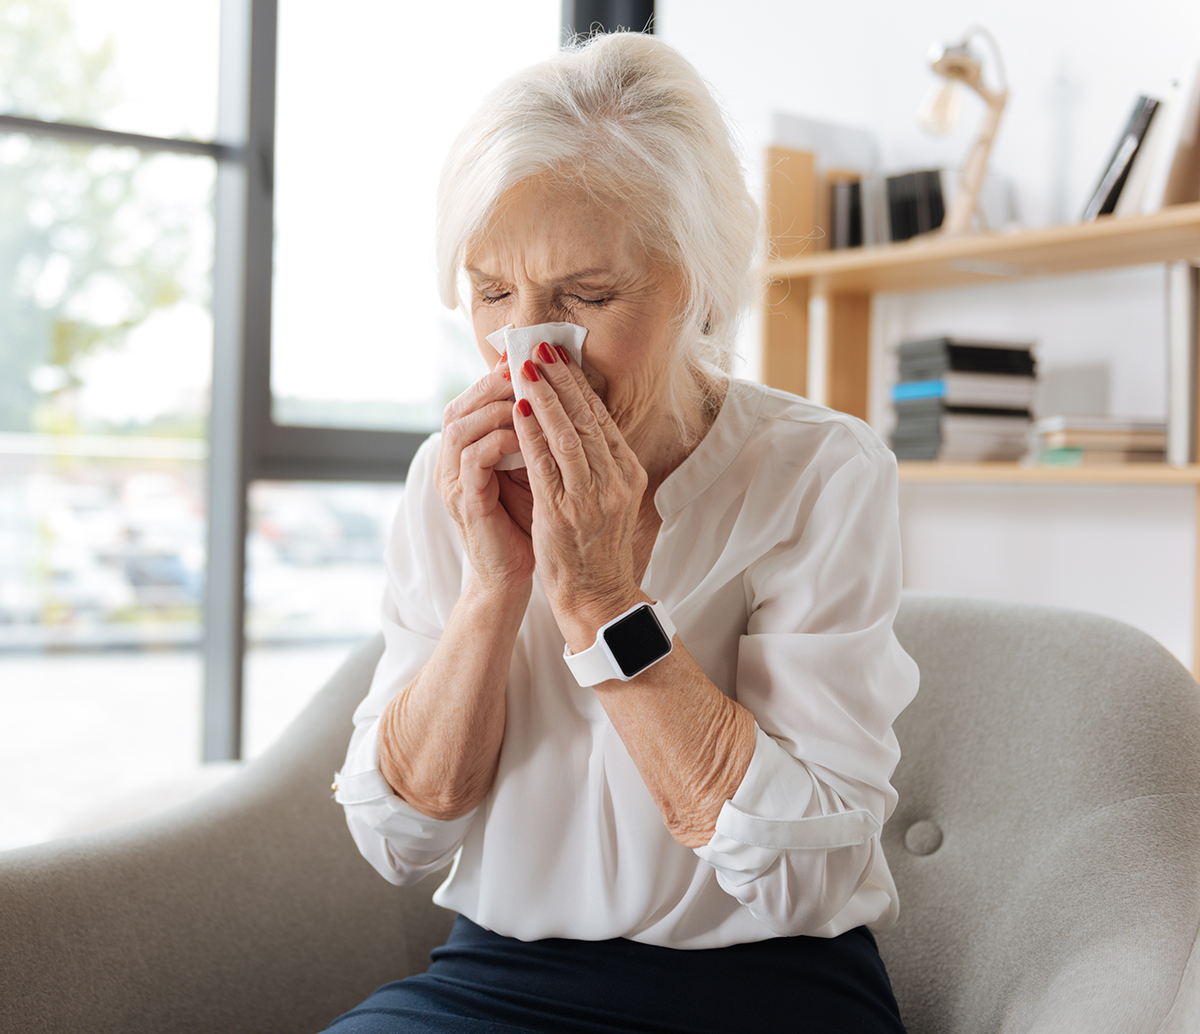 Catching a cold. Unhappy moody elderly woman holding a paper tissue and sneezing while having a cold